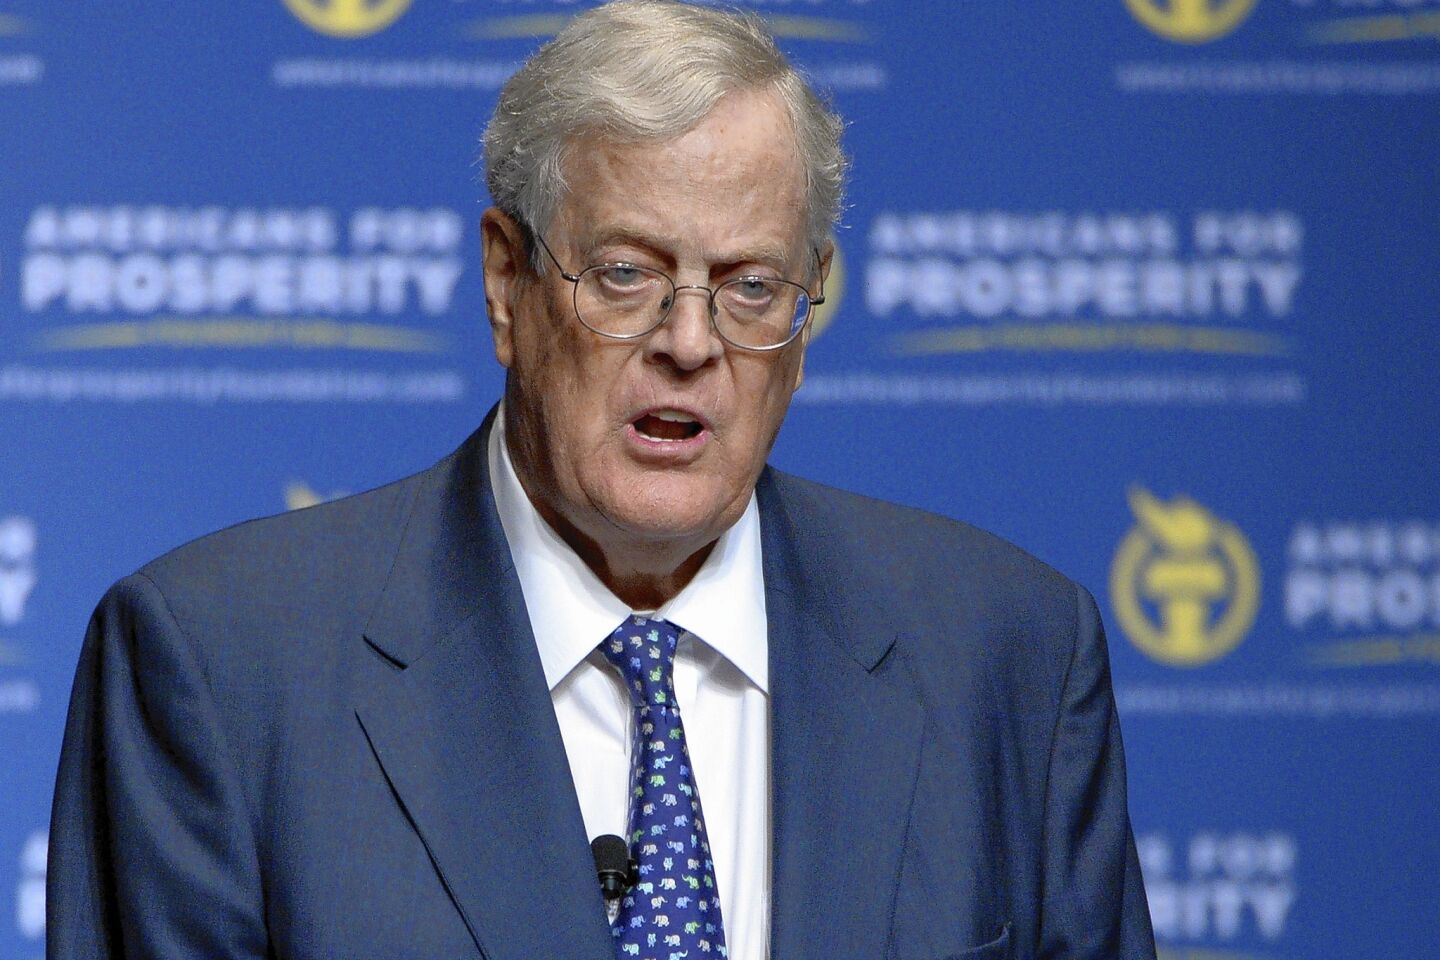 David Koch was the aide de camp to Charles, his older brother, as the two leveraged the family fortune to push American politics to the right. The Koch brothers pushed the boundaries of dark money in politics and fueled a backlash against environmental regulations and government programs such as healthcare and mass transit. He was 79.